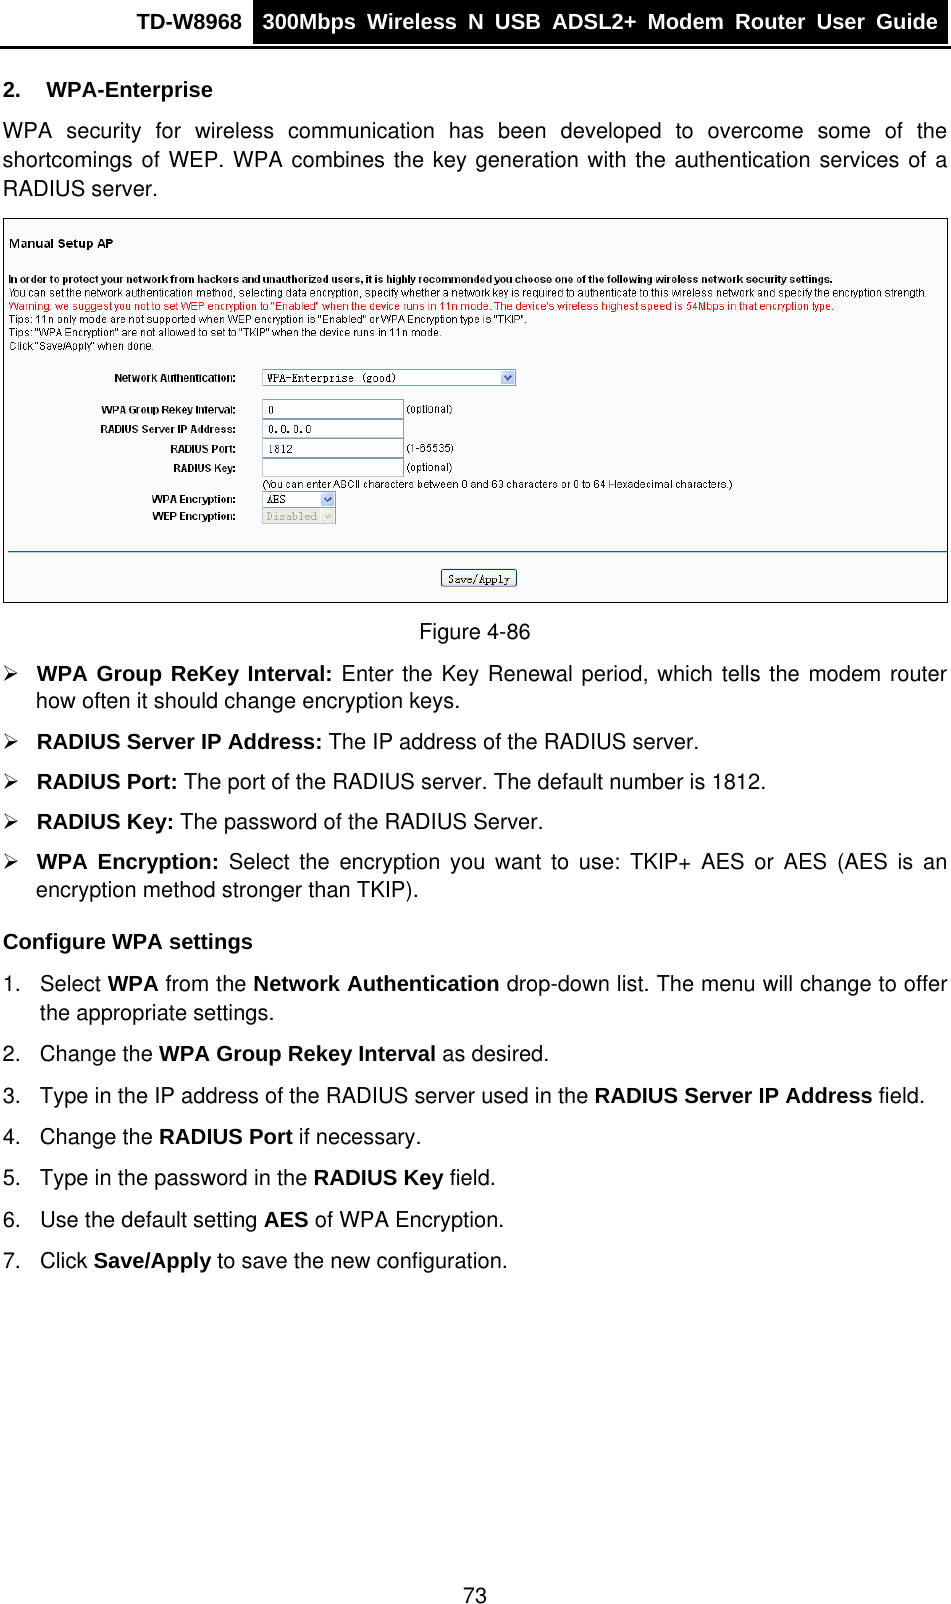 TD-W8968  300Mbps Wireless N USB ADSL2+ Modem Router User Guide  2. WPA-Enterprise WPA security for wireless communication has been developed to overcome some of the shortcomings of WEP. WPA combines the key generation with the authentication services of a RADIUS server.  Figure 4-86 ¾ WPA Group ReKey Interval: Enter the Key Renewal period, which tells the modem router how often it should change encryption keys. ¾ RADIUS Server IP Address: The IP address of the RADIUS server. ¾ RADIUS Port: The port of the RADIUS server. The default number is 1812. ¾ RADIUS Key: The password of the RADIUS Server. ¾ WPA Encryption: Select the encryption you want to use: TKIP+ AES or AES (AES is an encryption method stronger than TKIP). Configure WPA settings 1. Select WPA from the Network Authentication drop-down list. The menu will change to offer the appropriate settings. 2. Change the WPA Group Rekey Interval as desired. 3.  Type in the IP address of the RADIUS server used in the RADIUS Server IP Address field. 4. Change the RADIUS Port if necessary. 5.  Type in the password in the RADIUS Key field. 6.  Use the default setting AES of WPA Encryption. 7. Click Save/Apply to save the new configuration. 73 